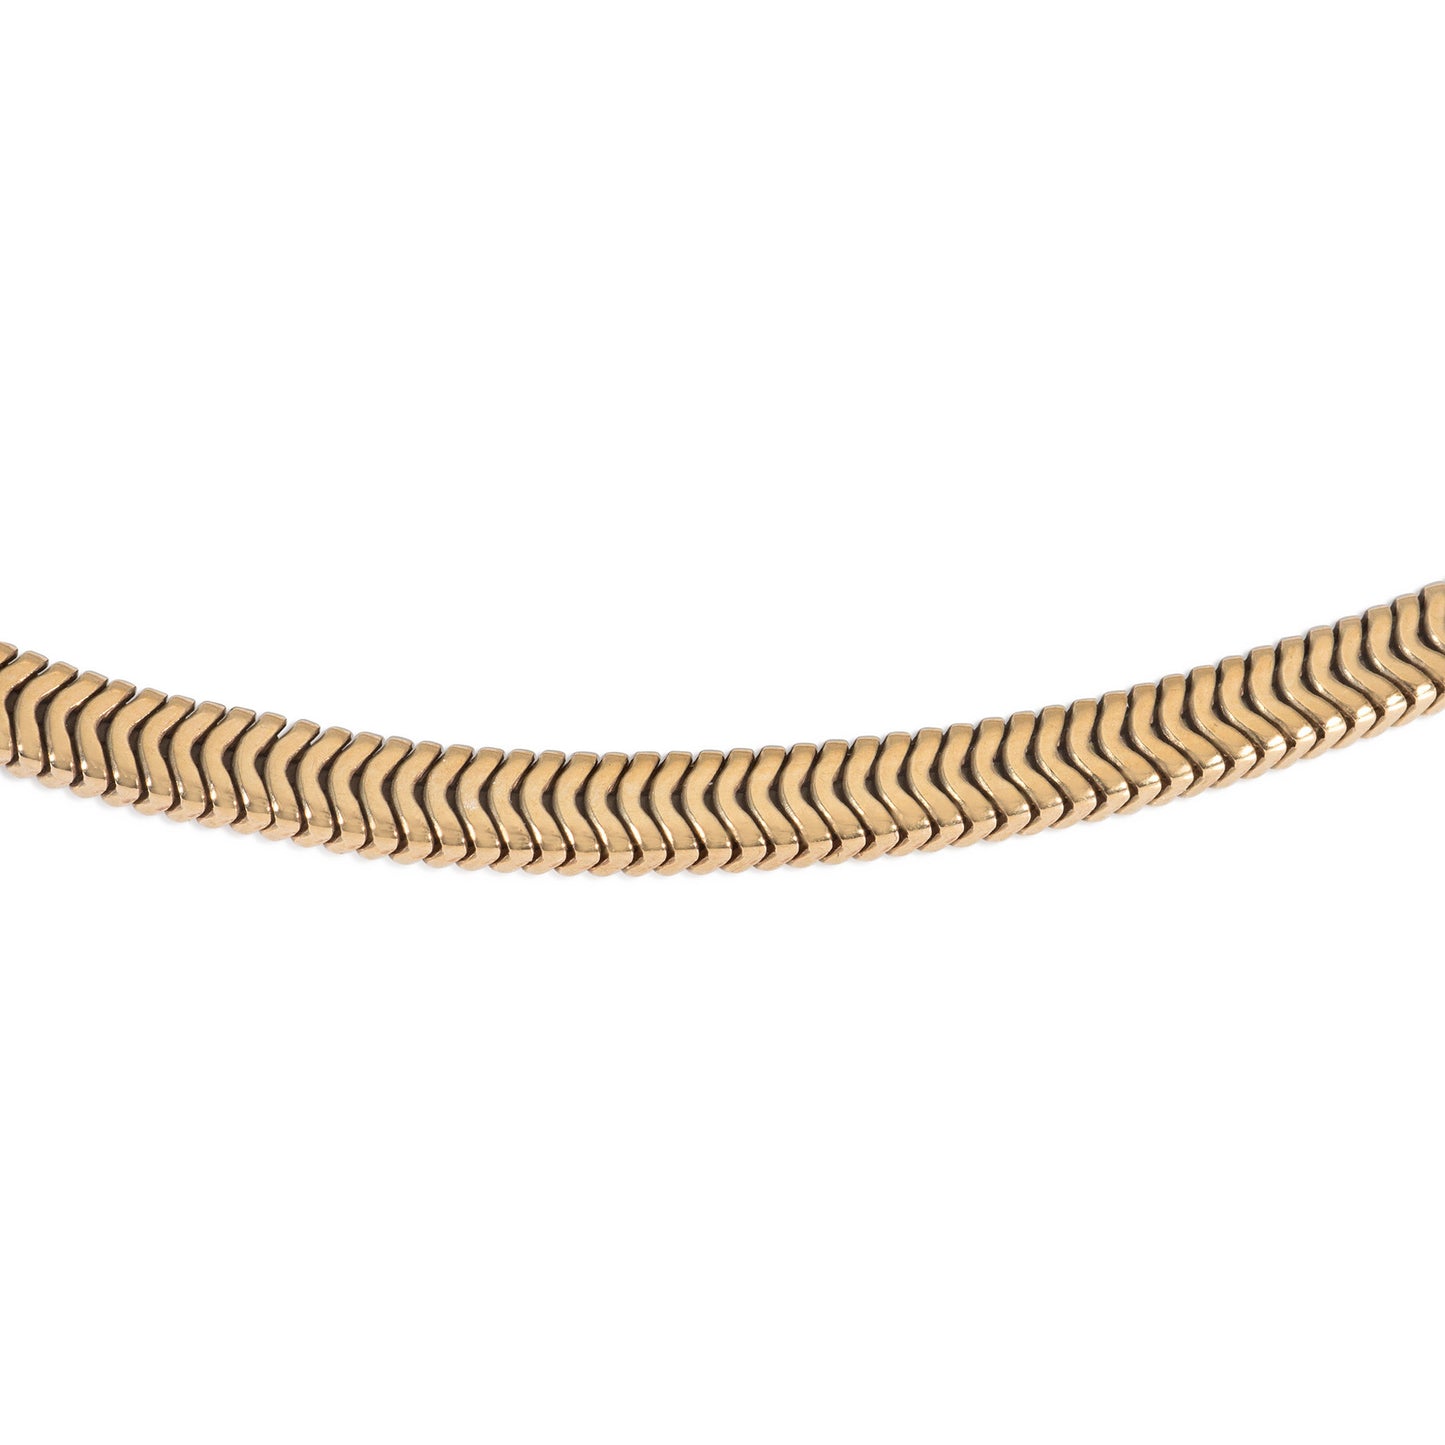 Cartier London Retro 18KT Yellow Gold Snake Chain Necklace close-up details